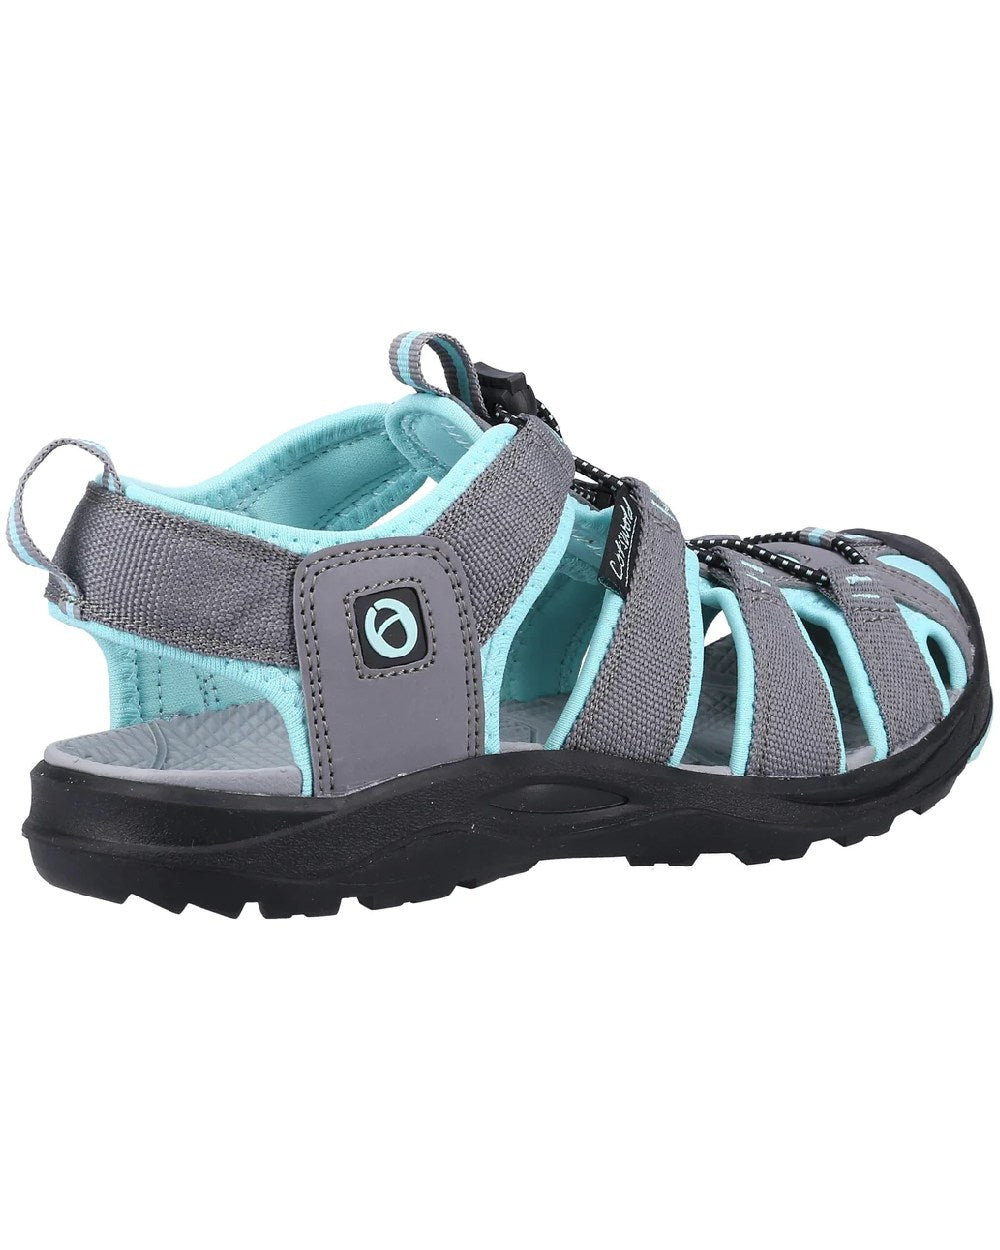 Cotswold Womens Marshfield Recycled Sandals in Turquoise 